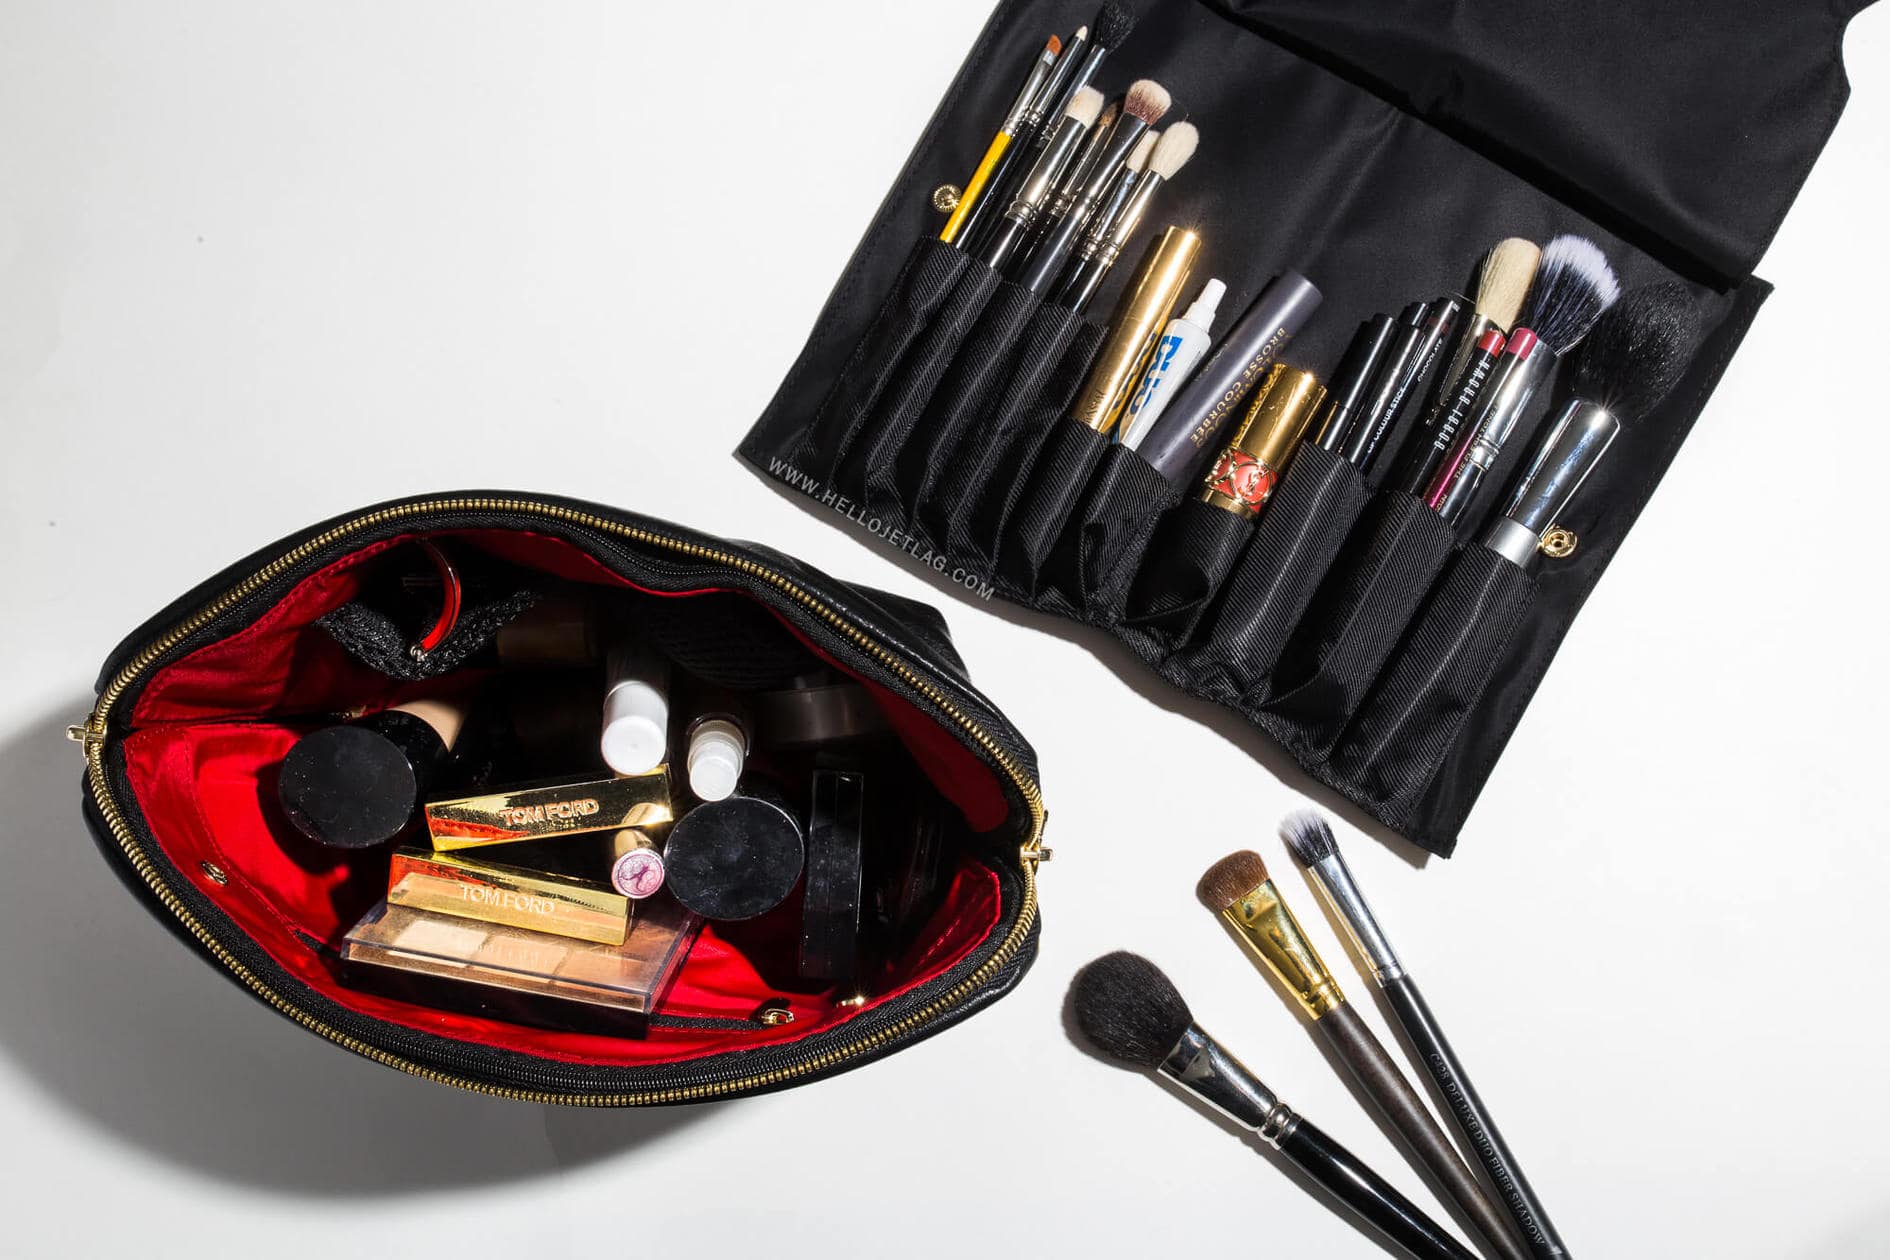 KUSSHI : The Travel Makeup Bag You Need to Know About •